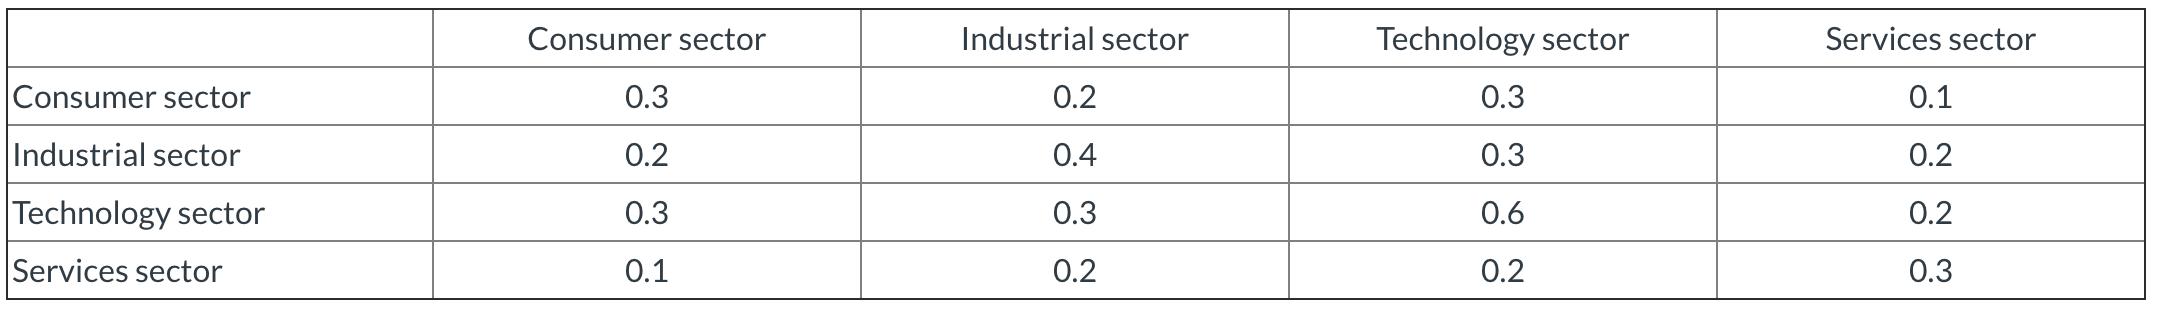 Consumer sector Industrial sector Technology sector Services sector Consumer sector 0.3 0.2 0.3 0.1 Industrial sector 0.2 0.4